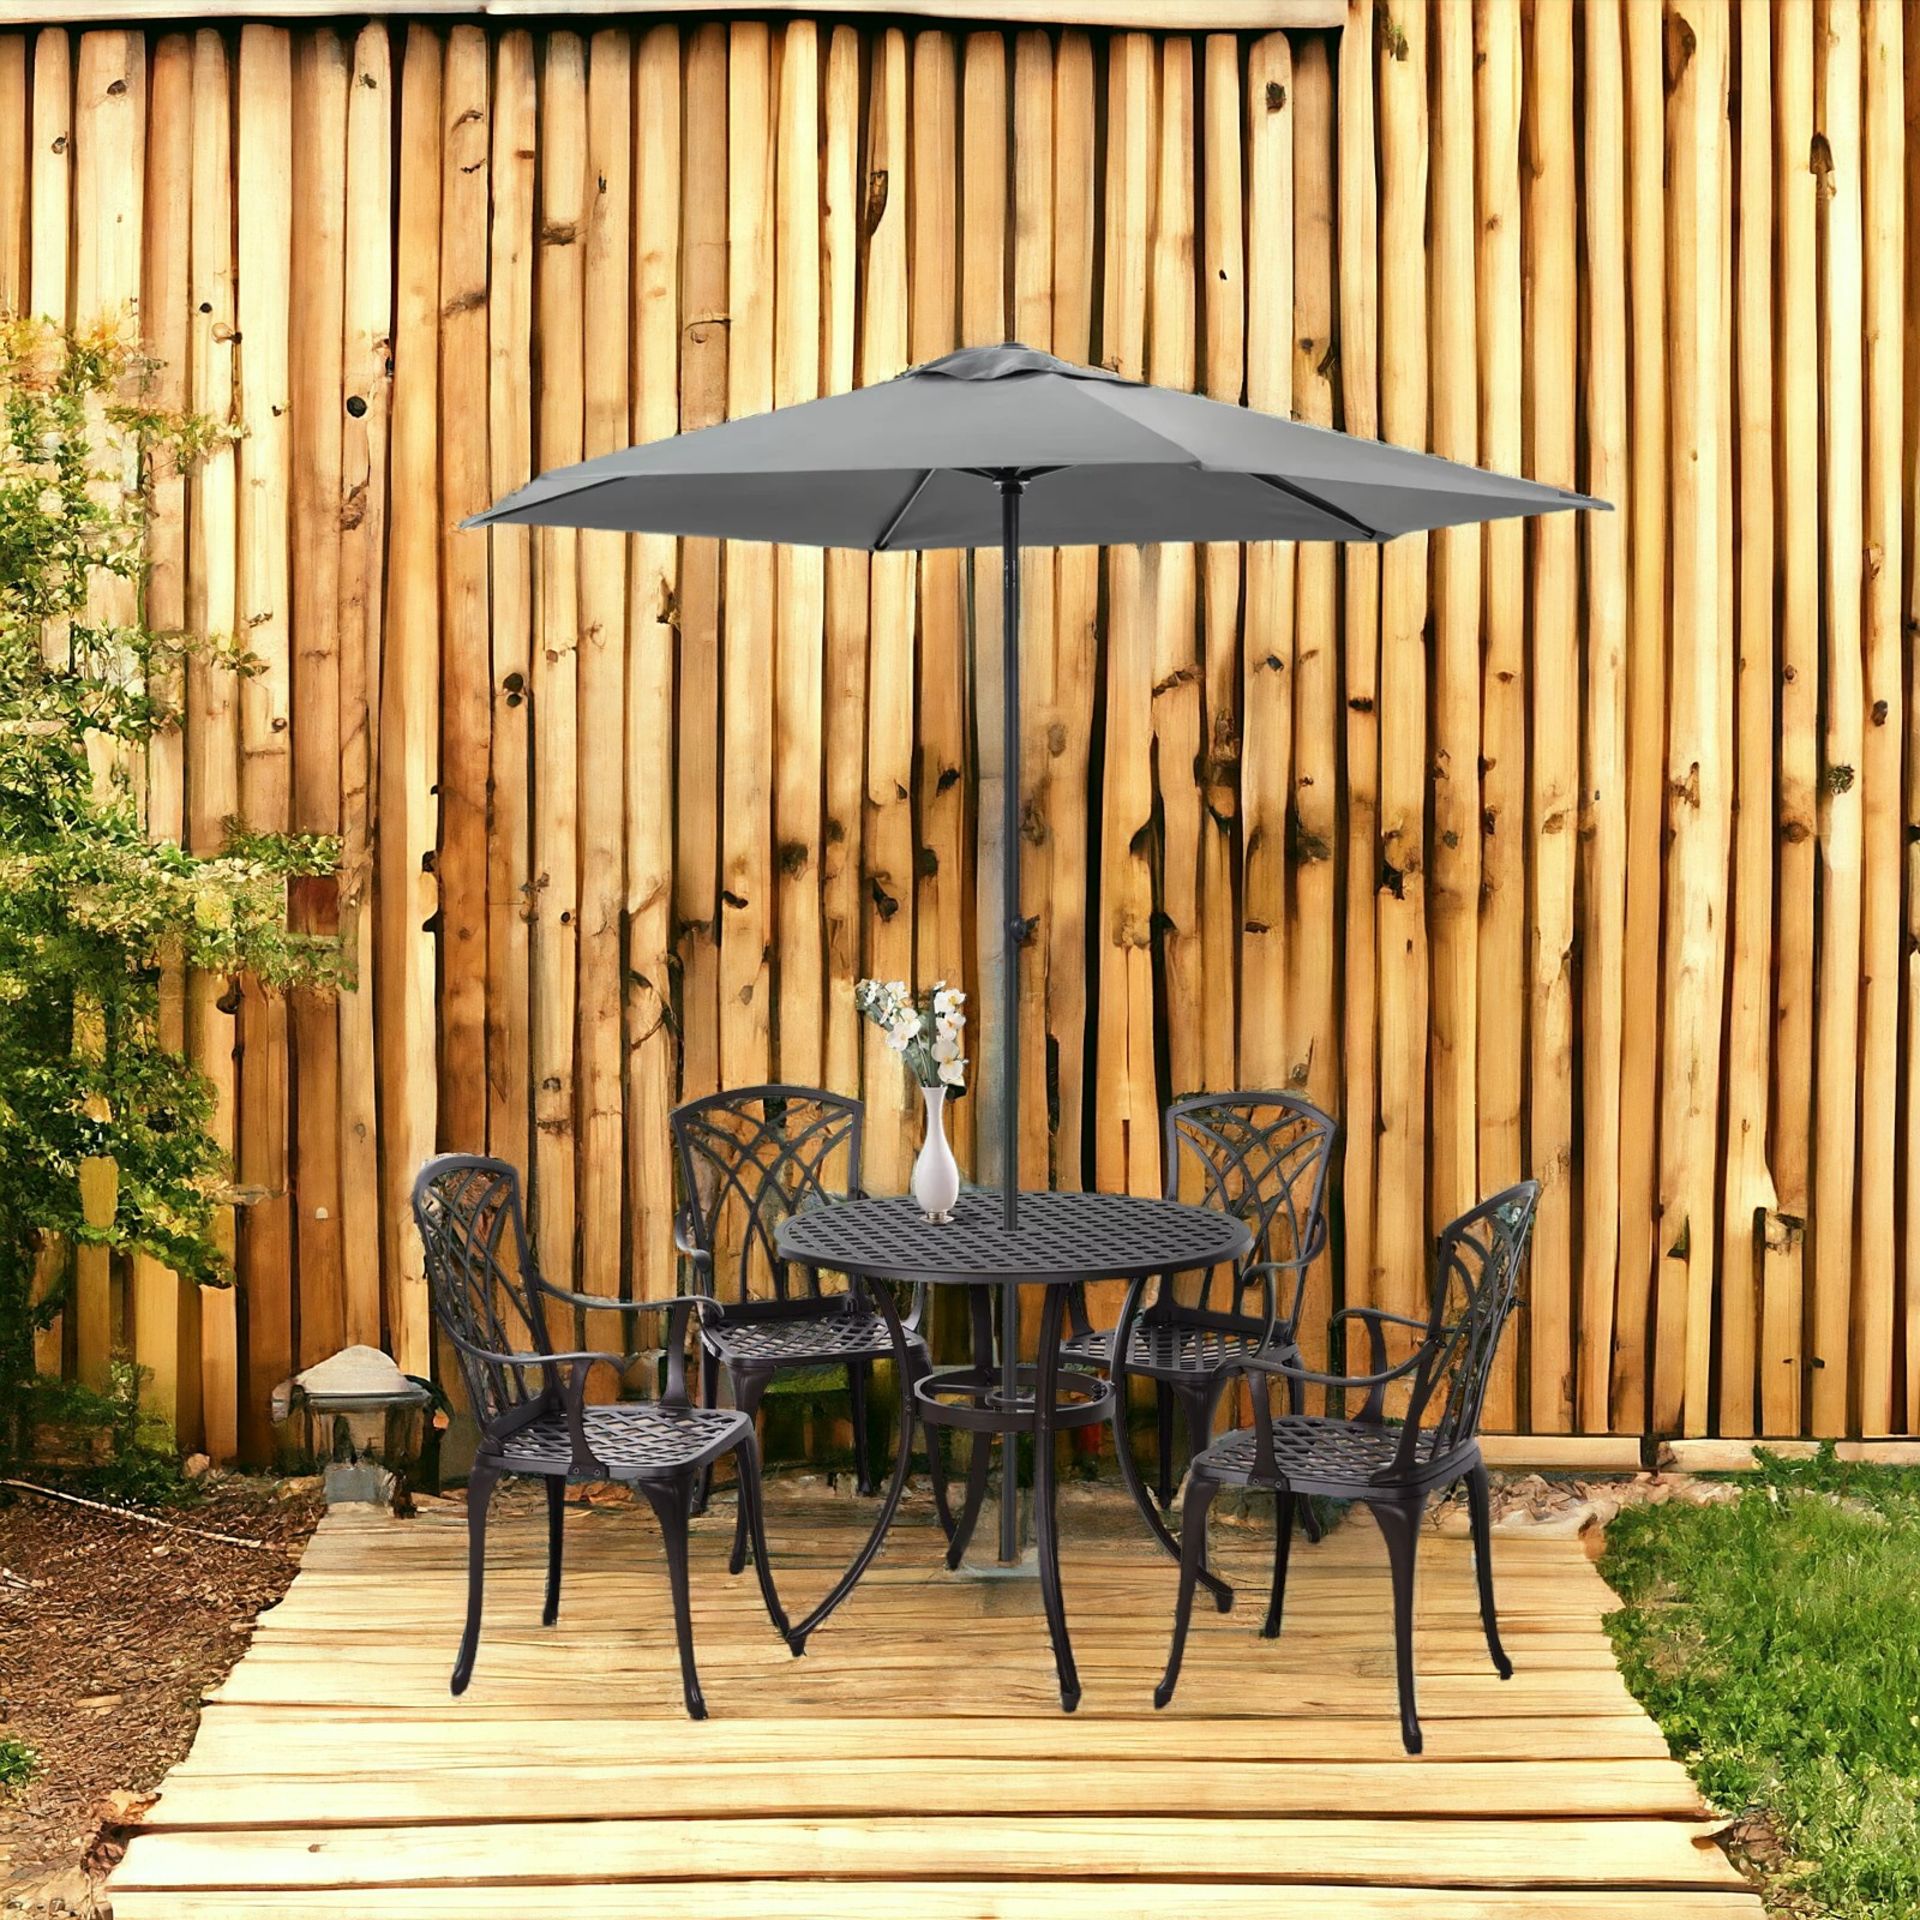 FREE DELIVERY - BRAND NEW 5 PCS COFFEE TABLE CHAIRS OUTDOOR GARDEN FURNITURE SET - Image 3 of 3